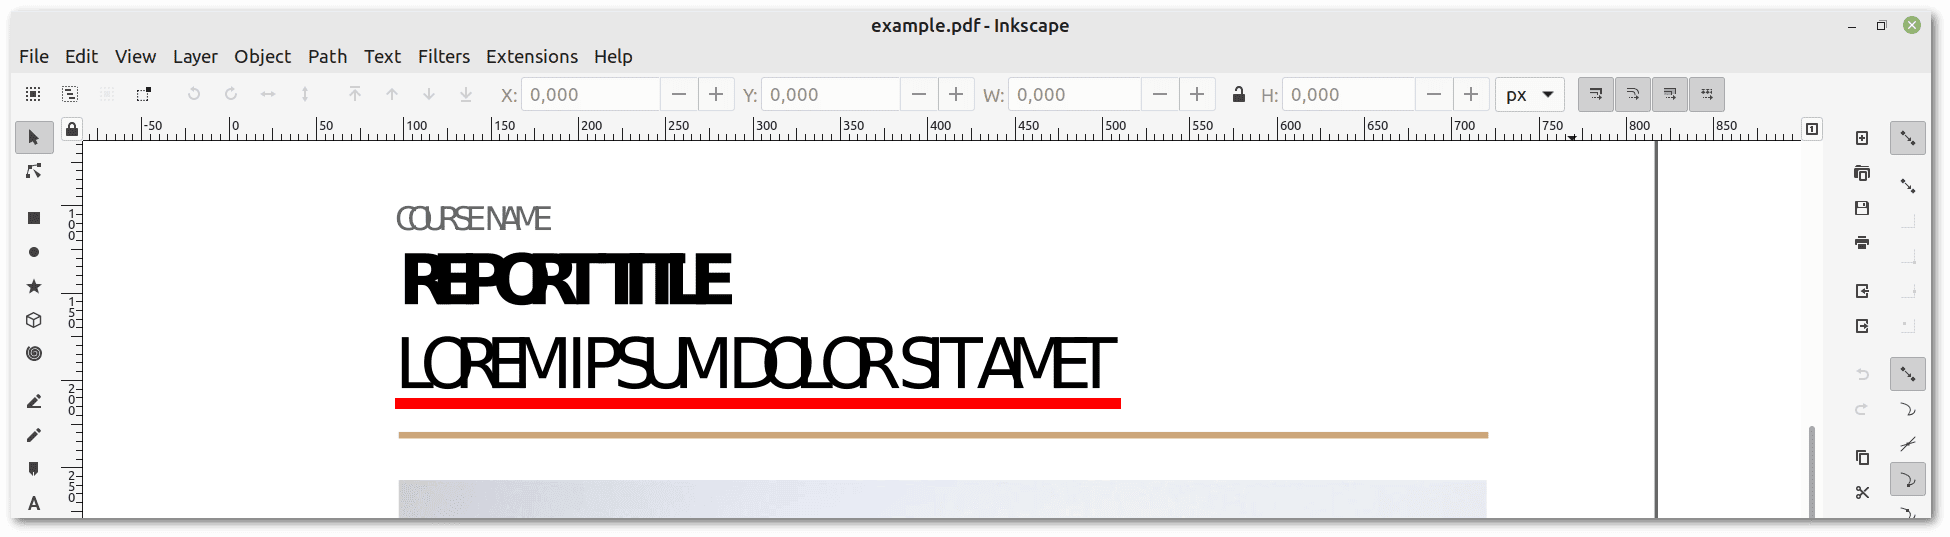 Inkscape wrong fonts when importing PDF